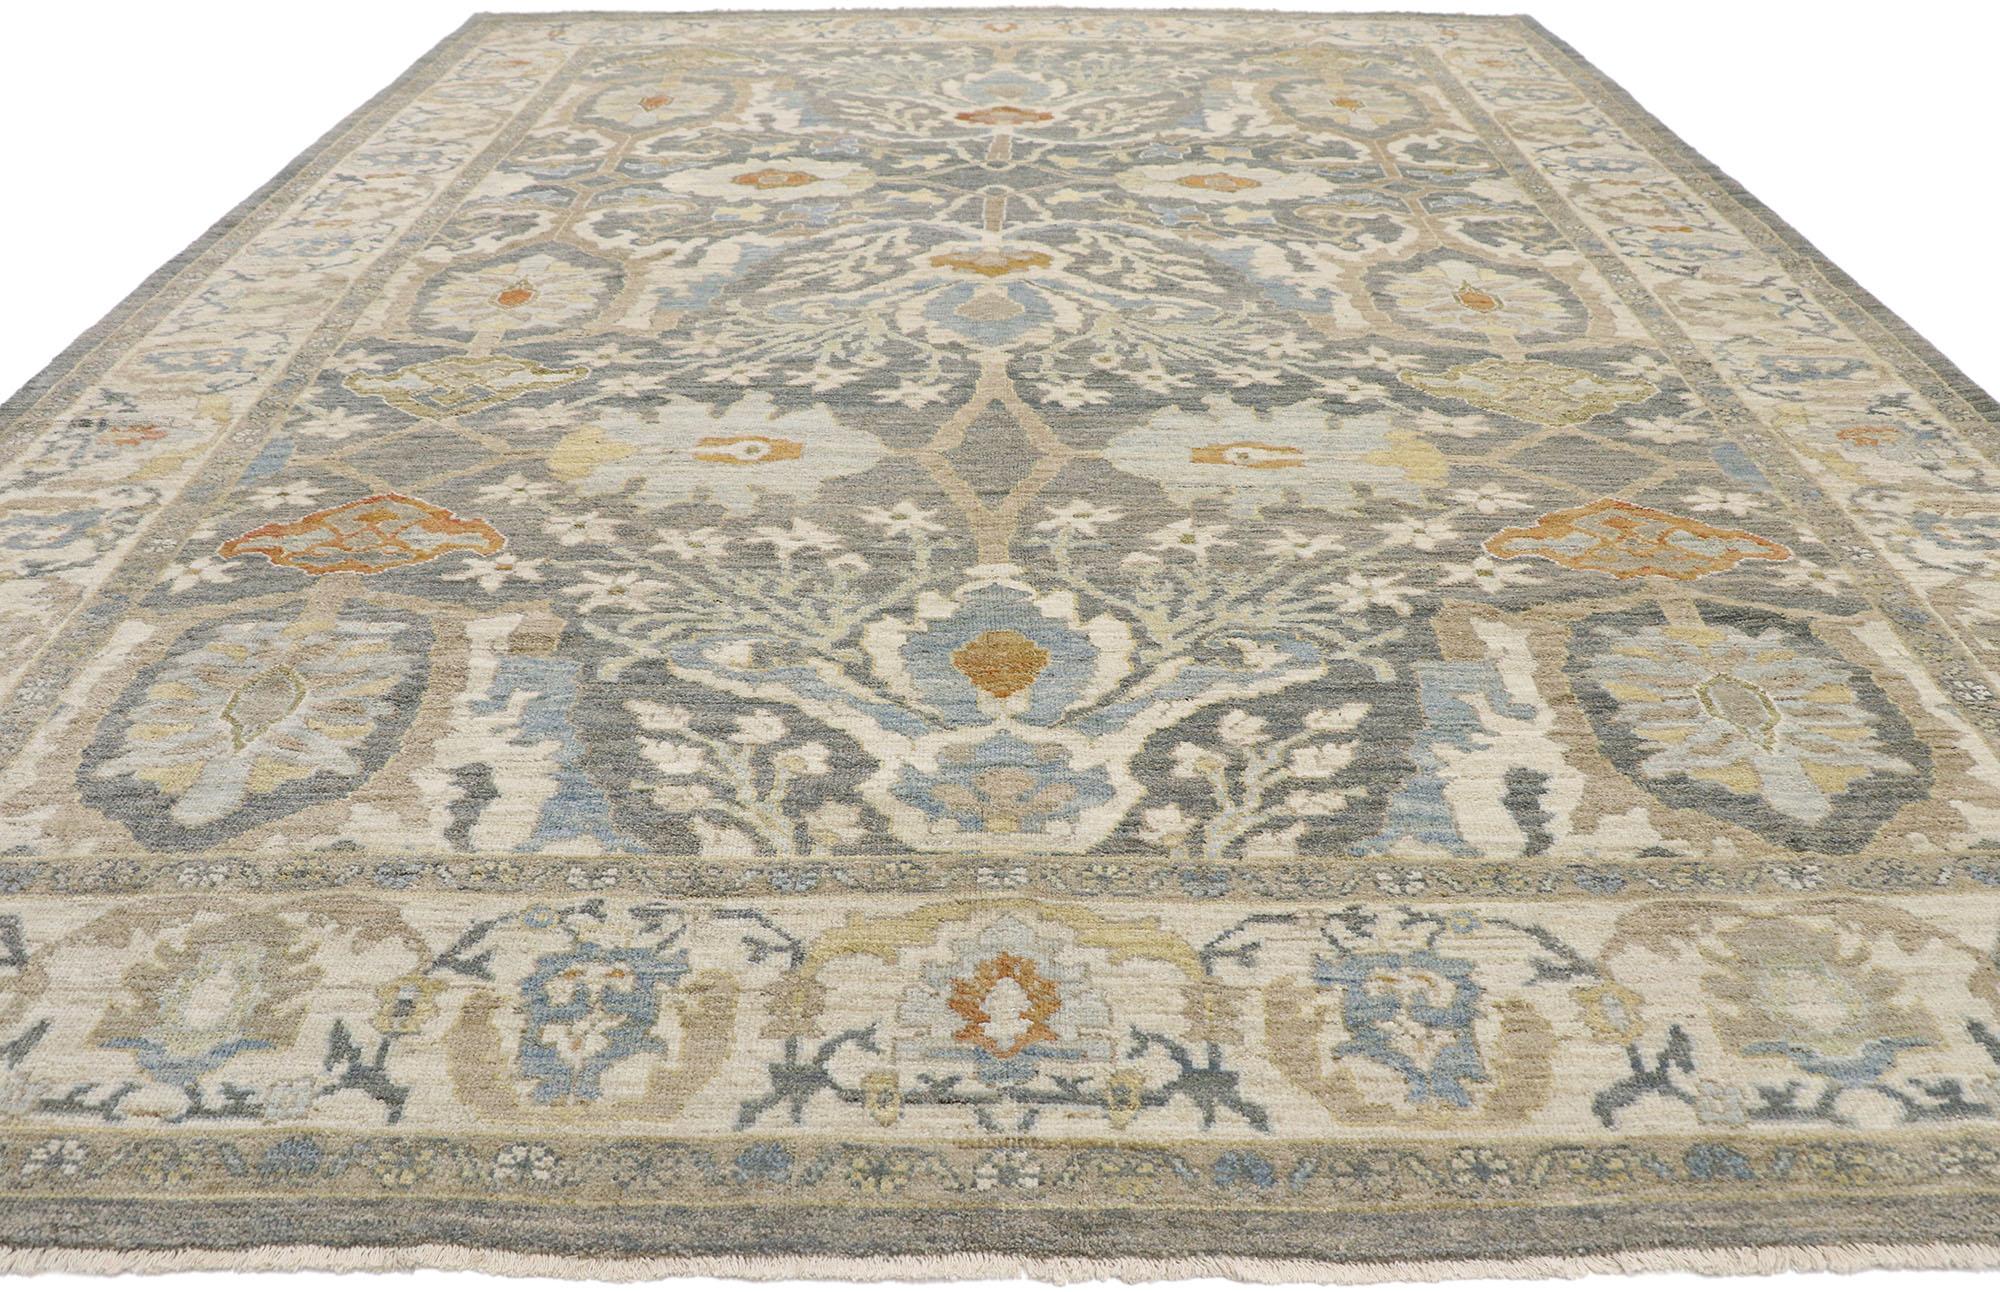 Turkish New Contemporary Persian Sultanabad Rug with Modern Transitional Style